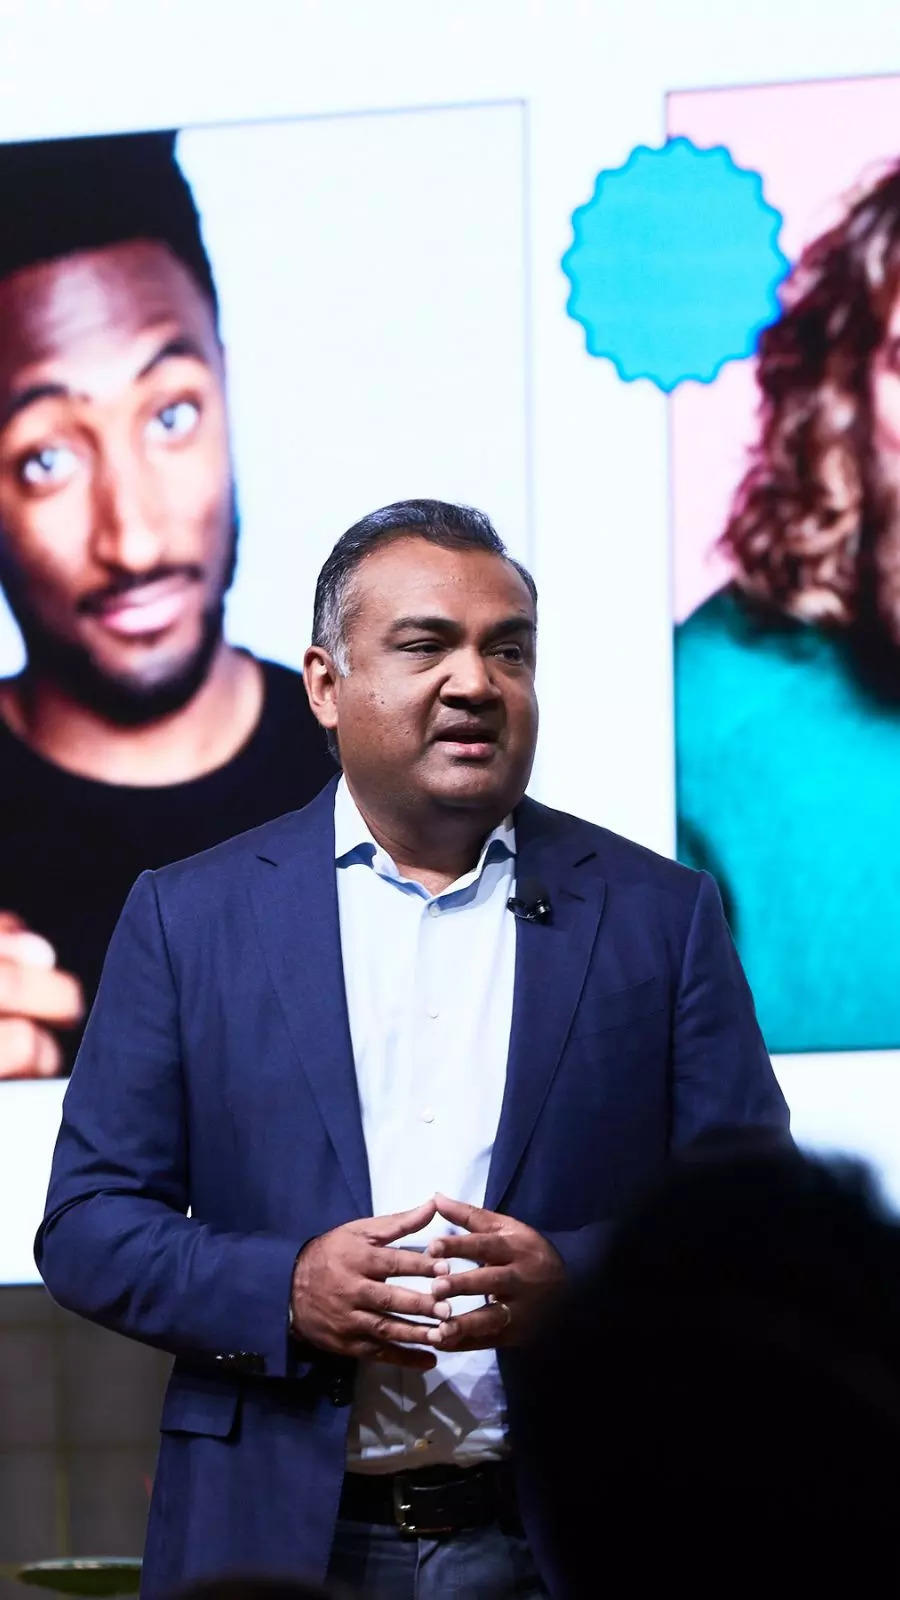 Neal Mohan: Youtube New Ceo Neal Mohan: 8 Things You Did Not Know About Him 